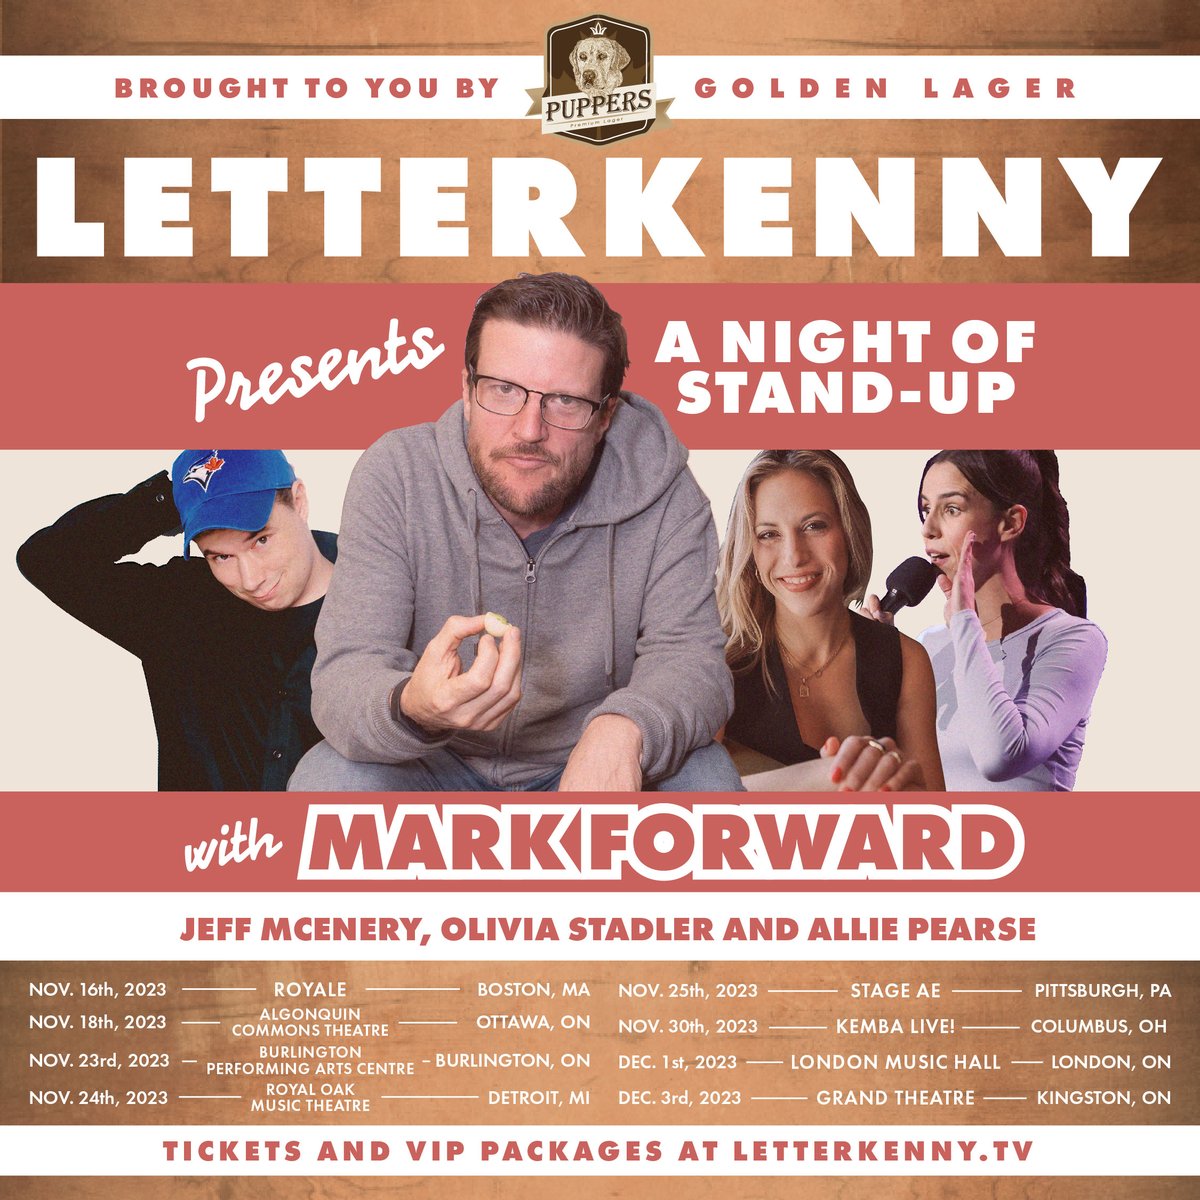 You can get presale tickets to your good buddies’ stand-up tour. Headlined by #MarkForward with @JeffMcEnery (Alexander) and Letterkenny writers @livstadler and @allie_pearse. Use code PUPPERS at letterkenny.tv/live Brought to you by @officialpuppers & @newmetricmedia